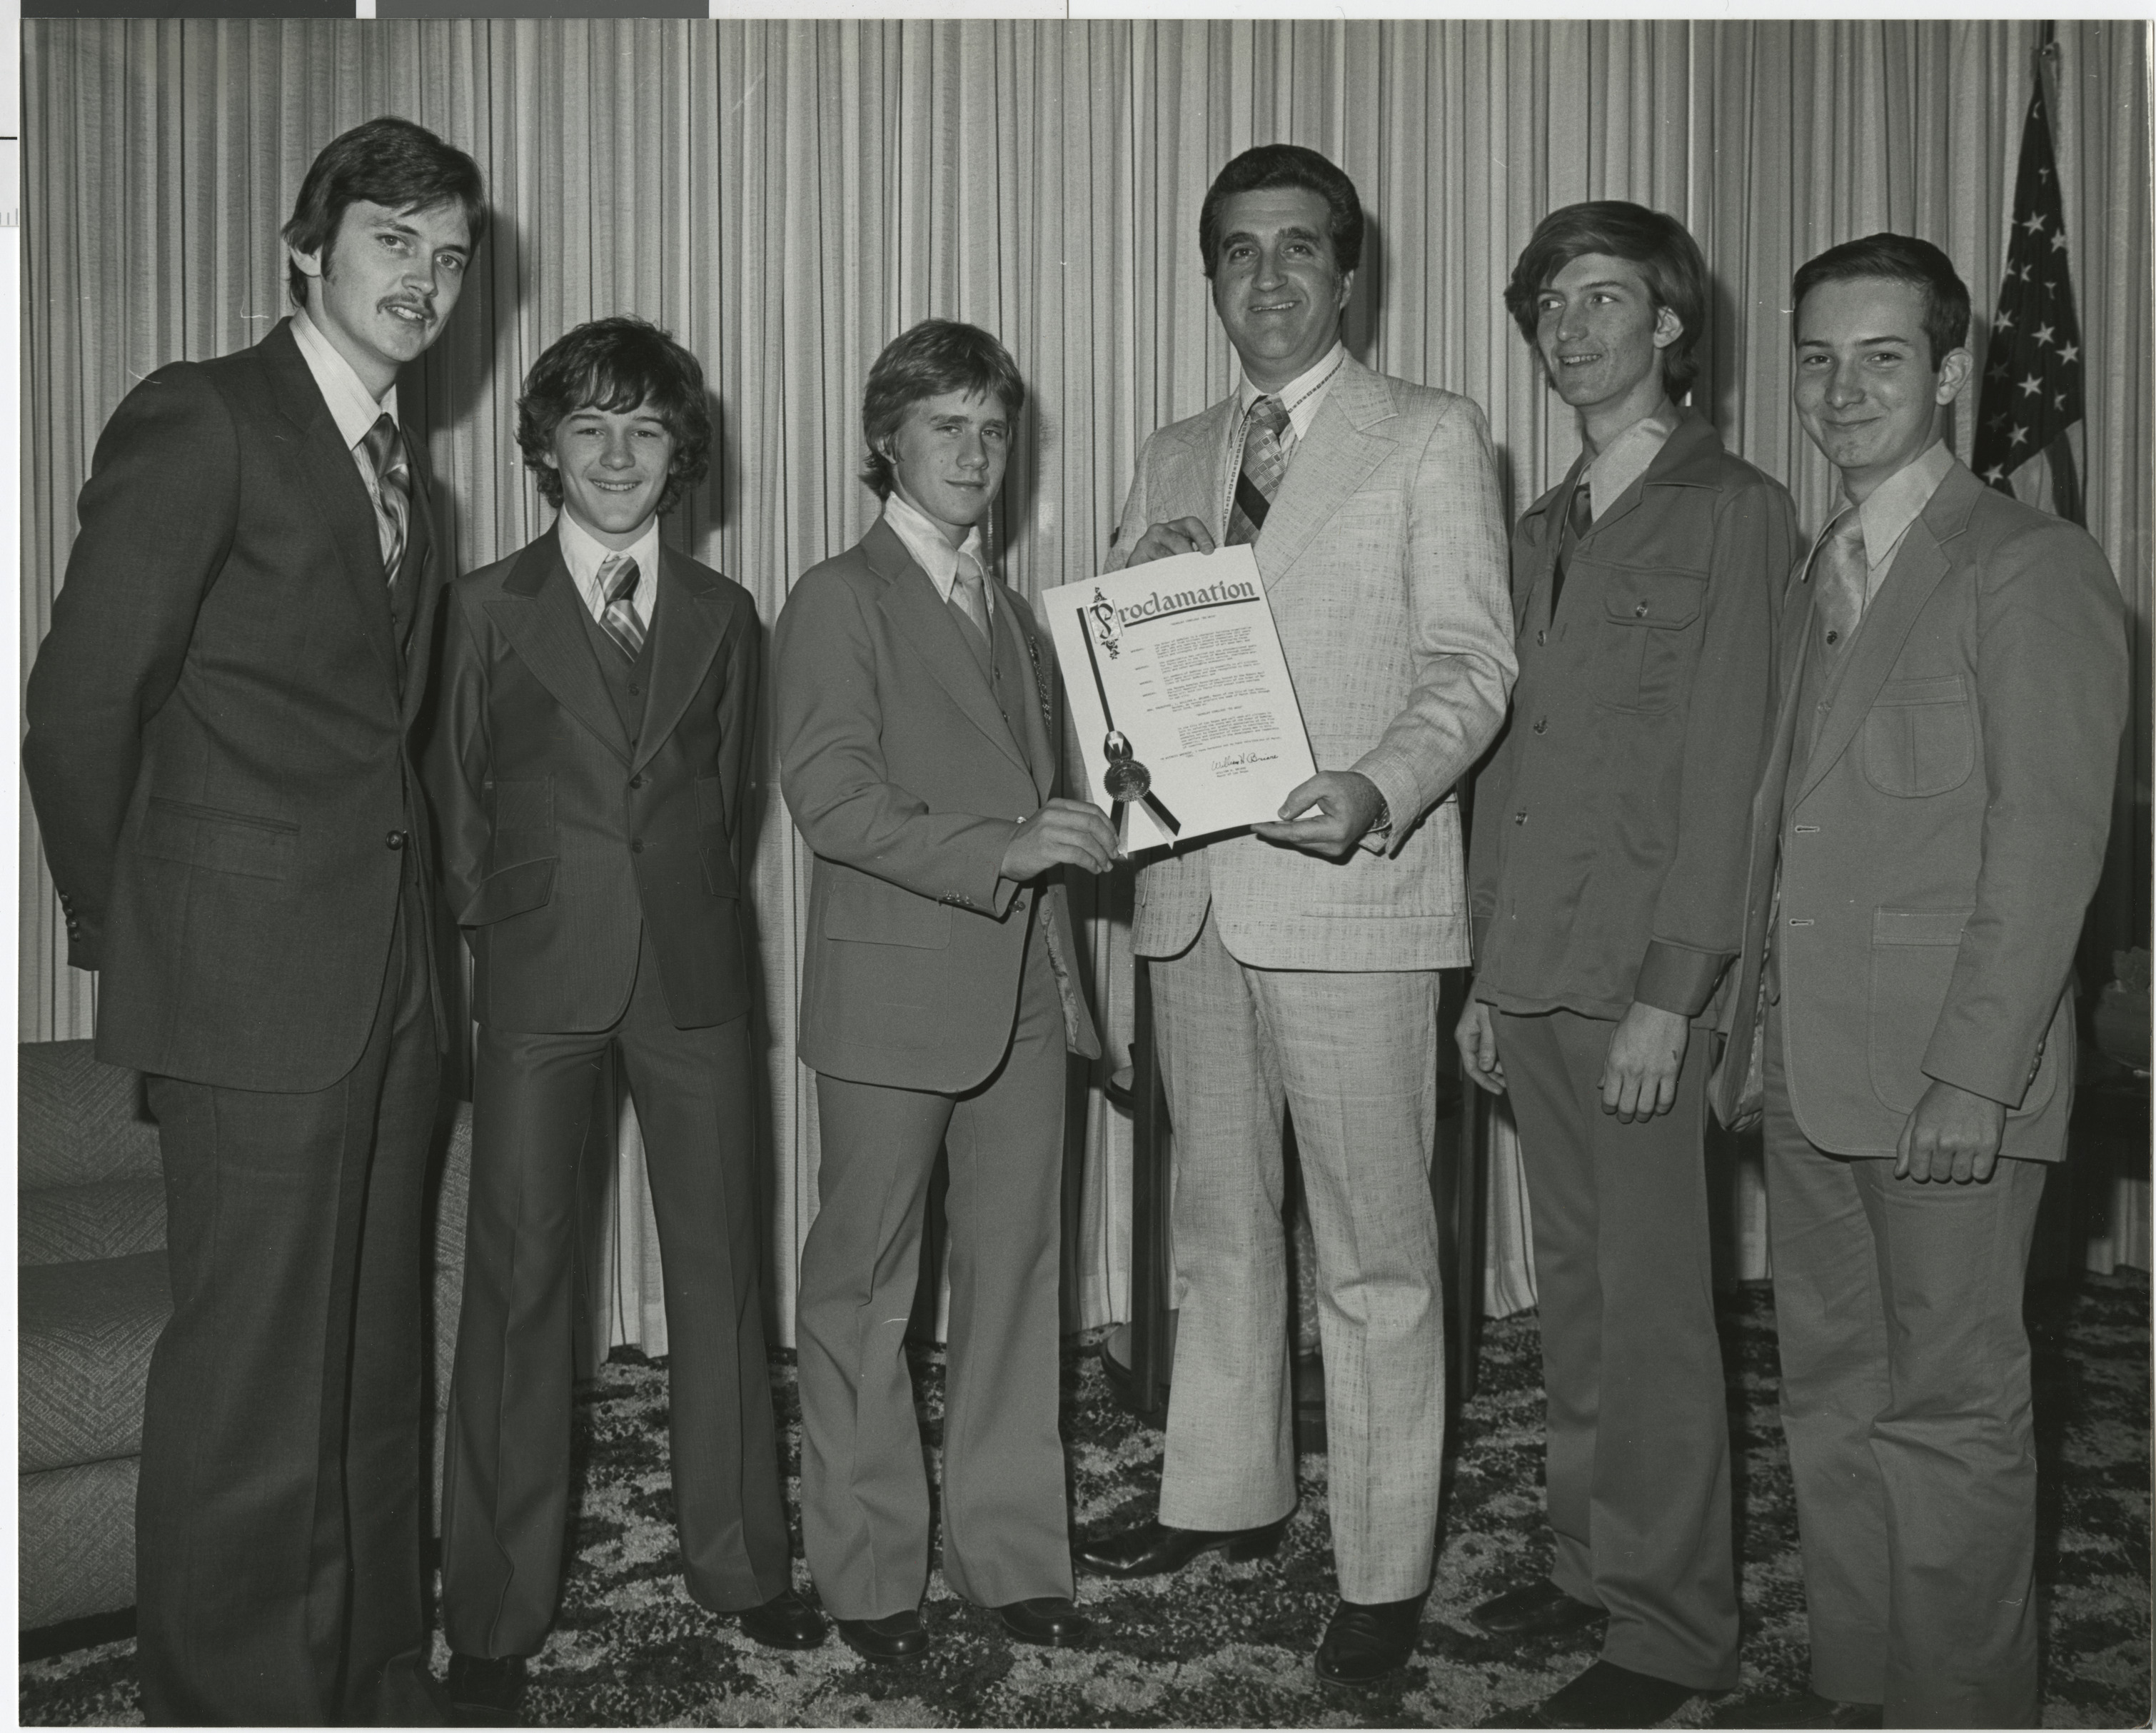 Photograph of Ron Lurie presents proclamation to a group of young men